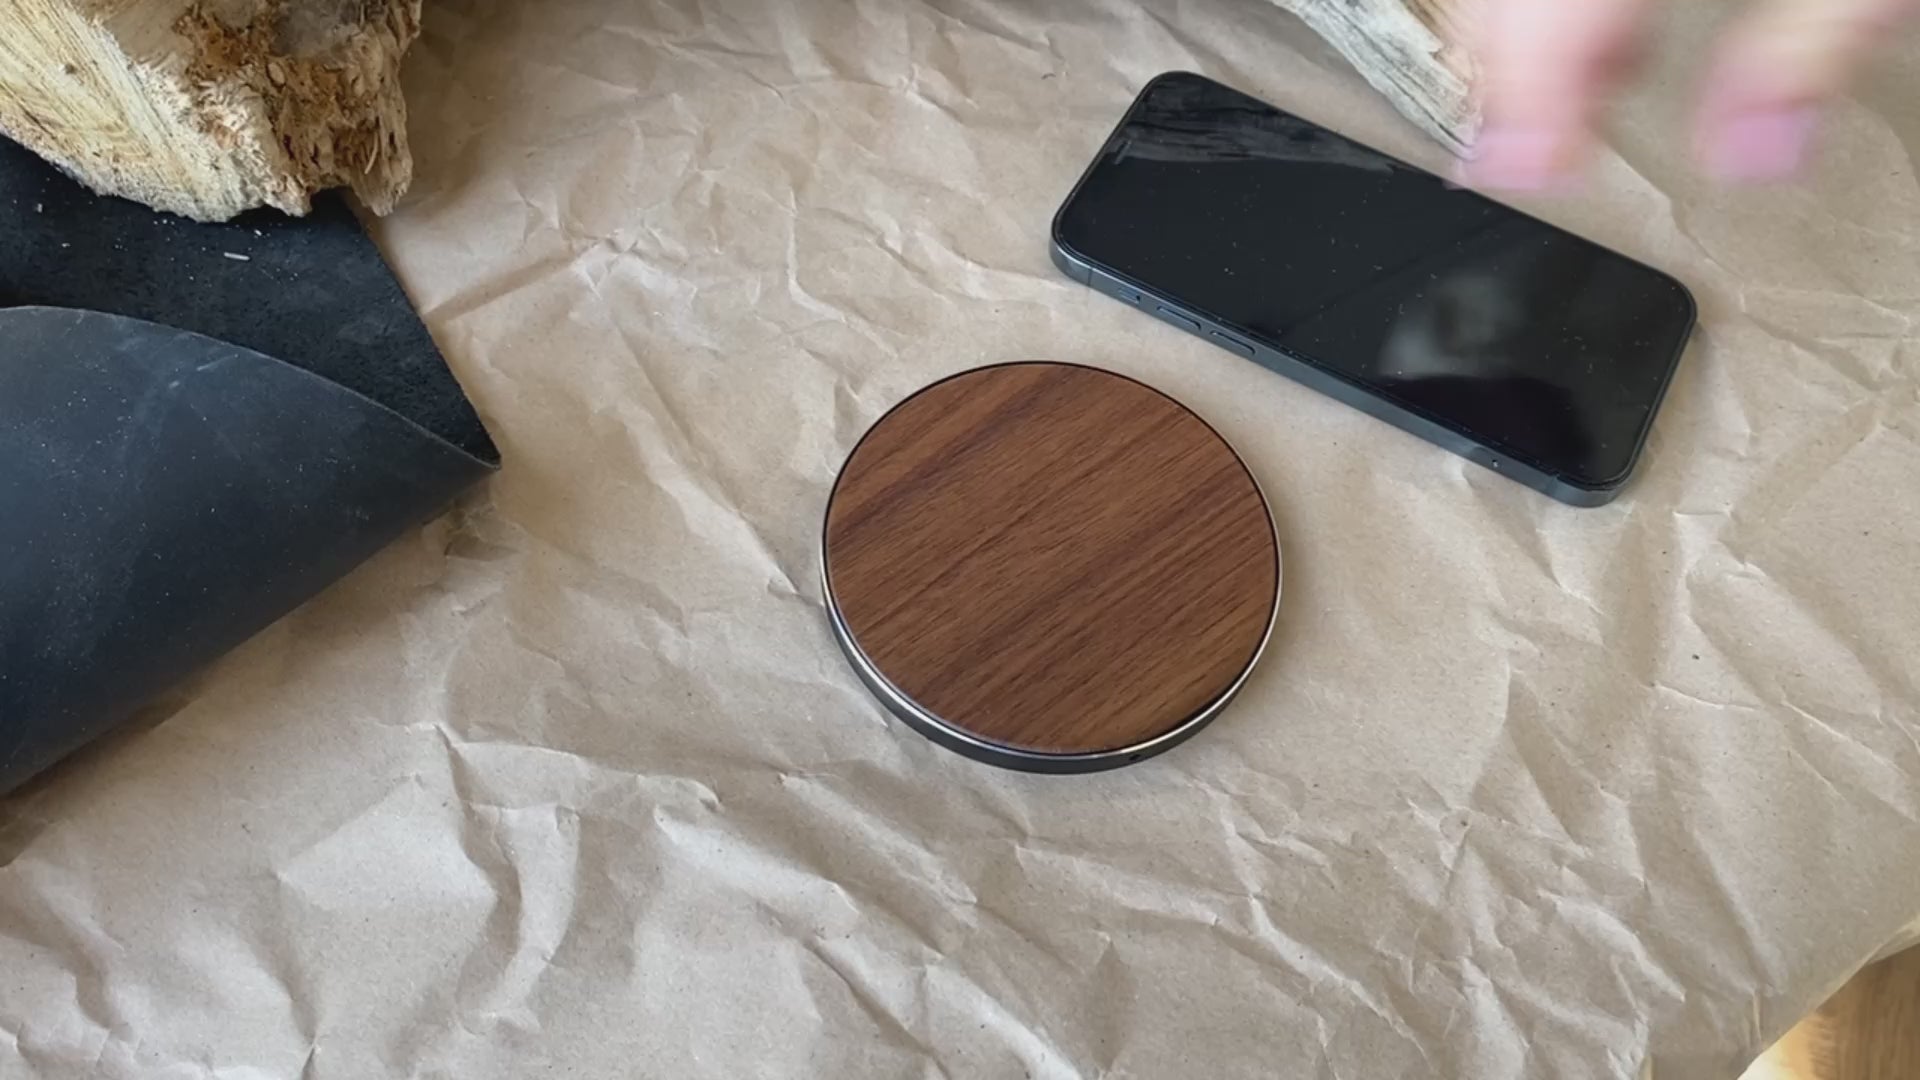 Wireless Fast Charger engraving Liverpool